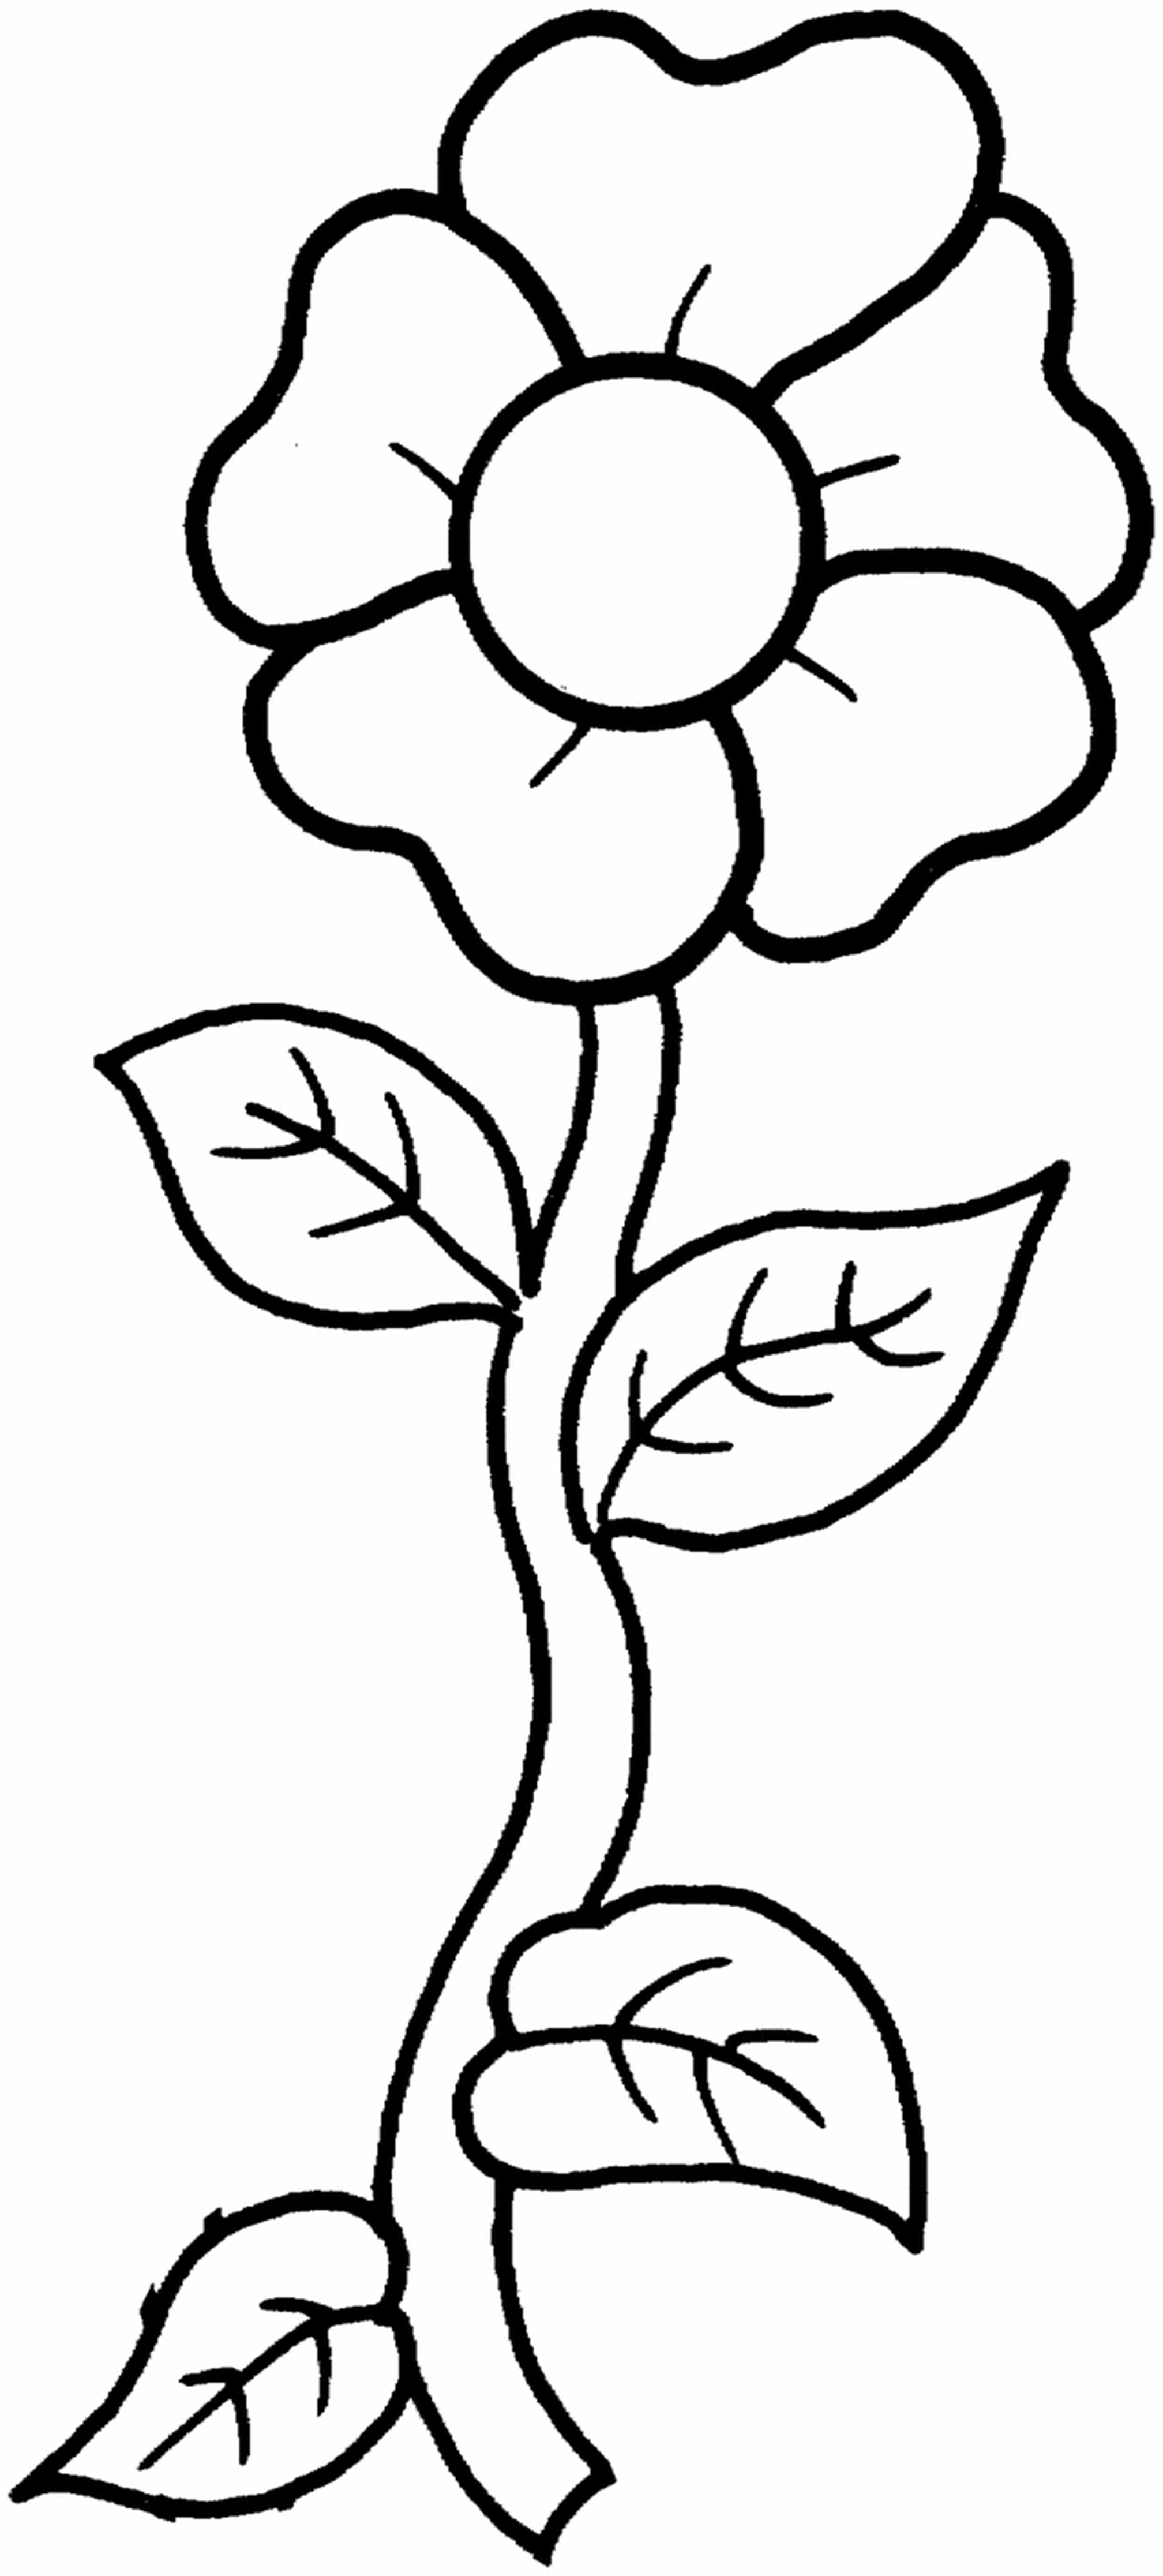 Free Printable Flower Coloring Pages For Kids - Best Coloring Pages For